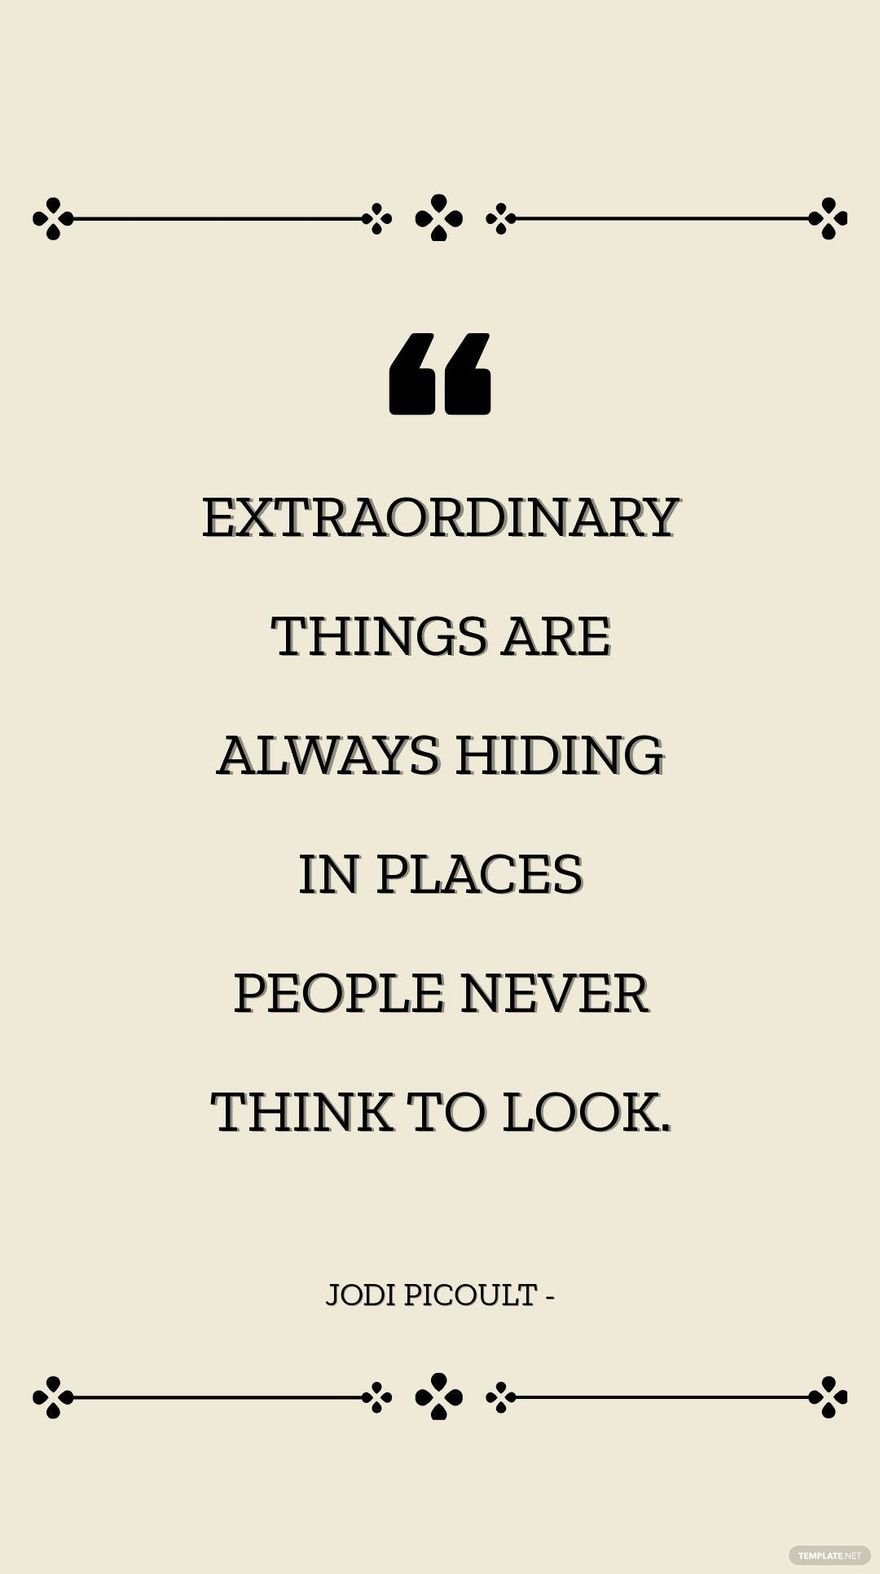 Jodi Picoult - Extraordinary things are always hiding in places people never think to look.